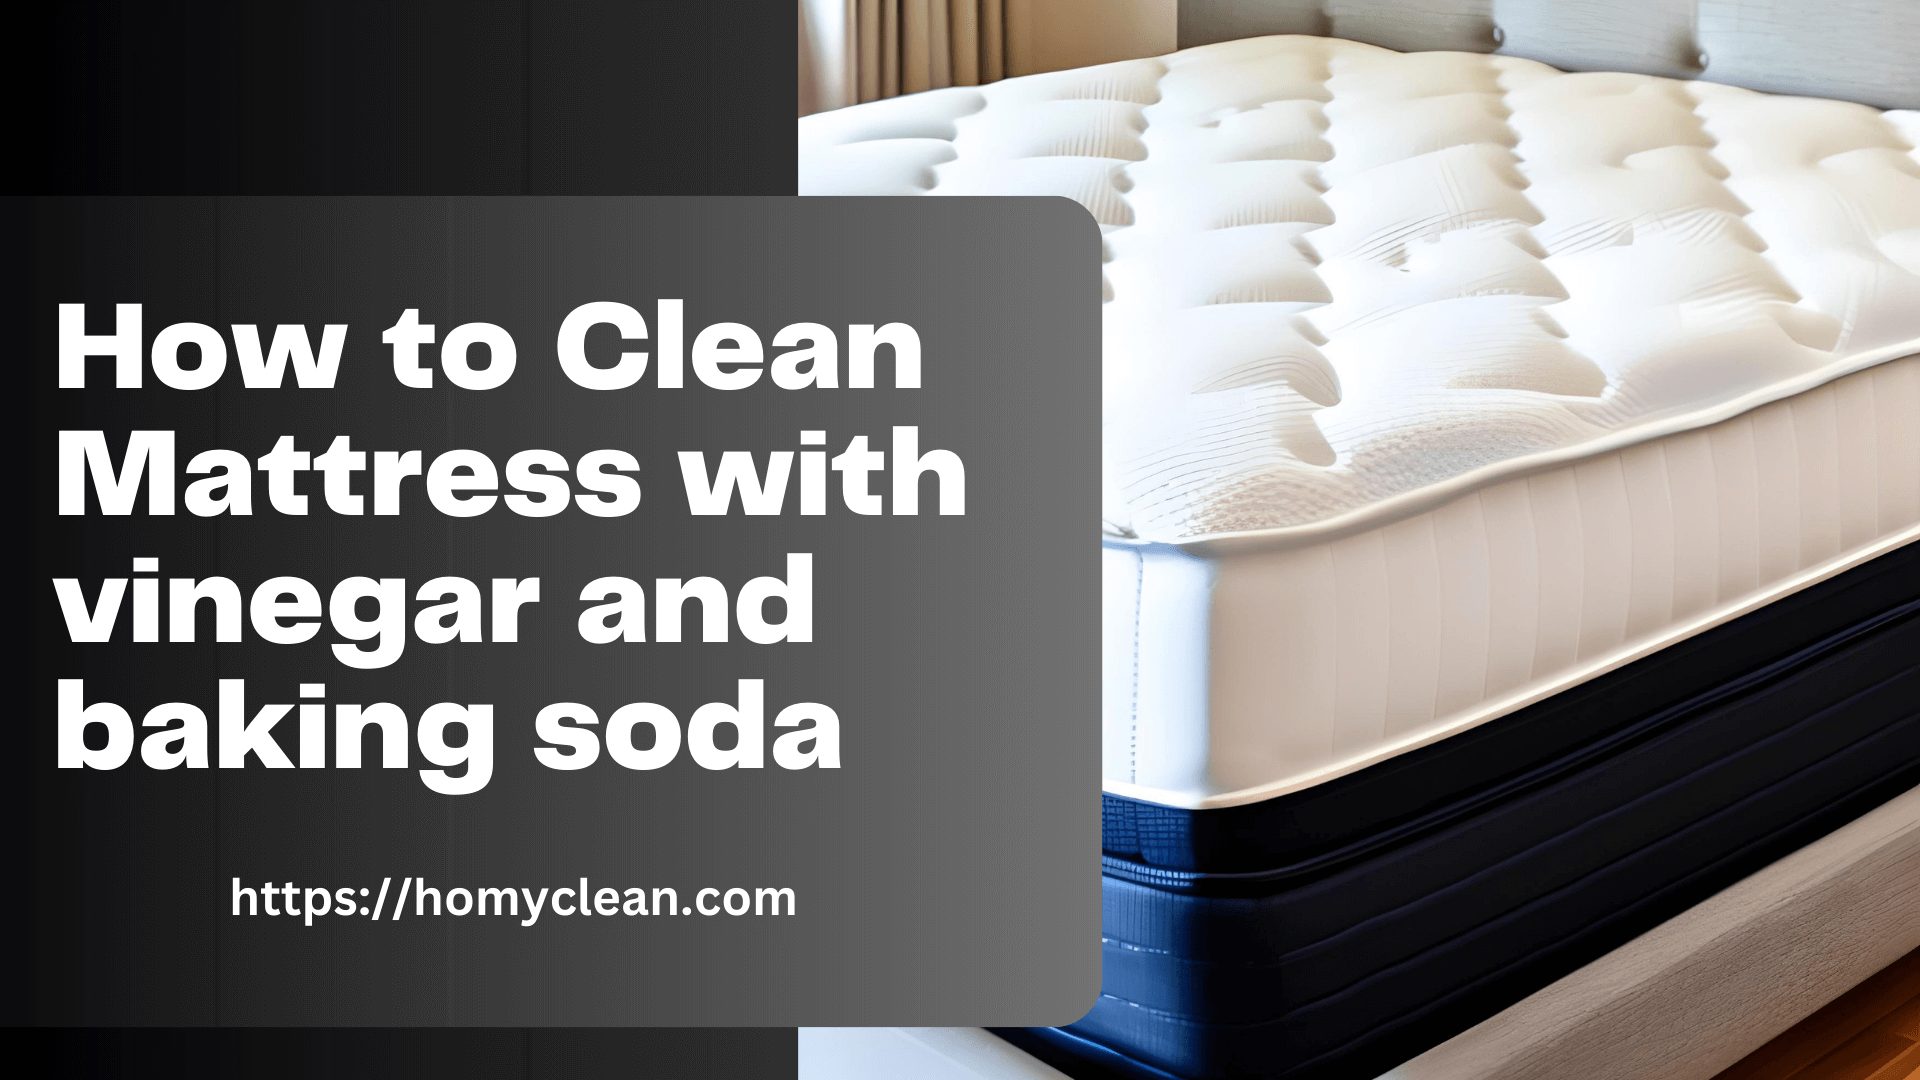 How to Clean Mattress with vinegar and baking soda